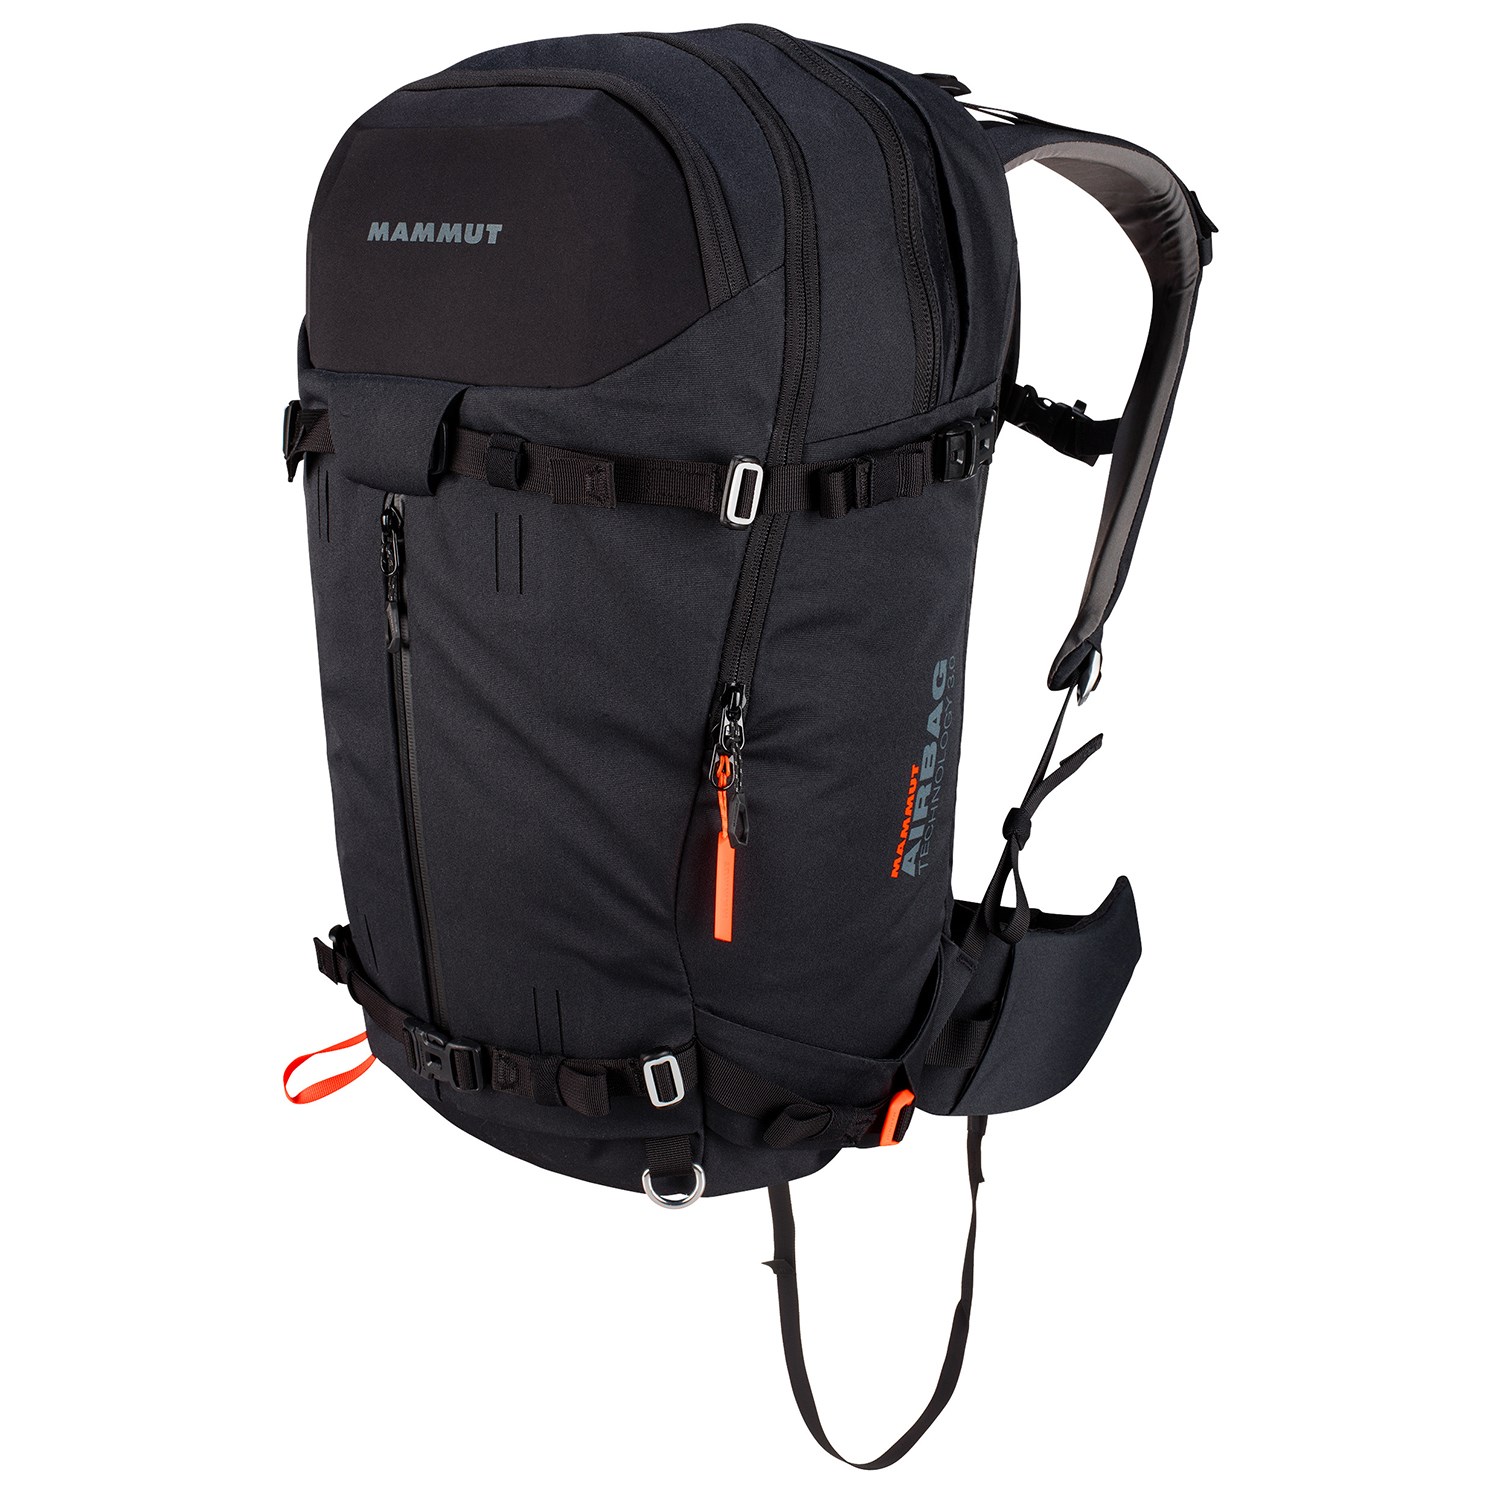 Big Volume: Mammut's Pro Removable Airbag 3.0 - The Backcountry